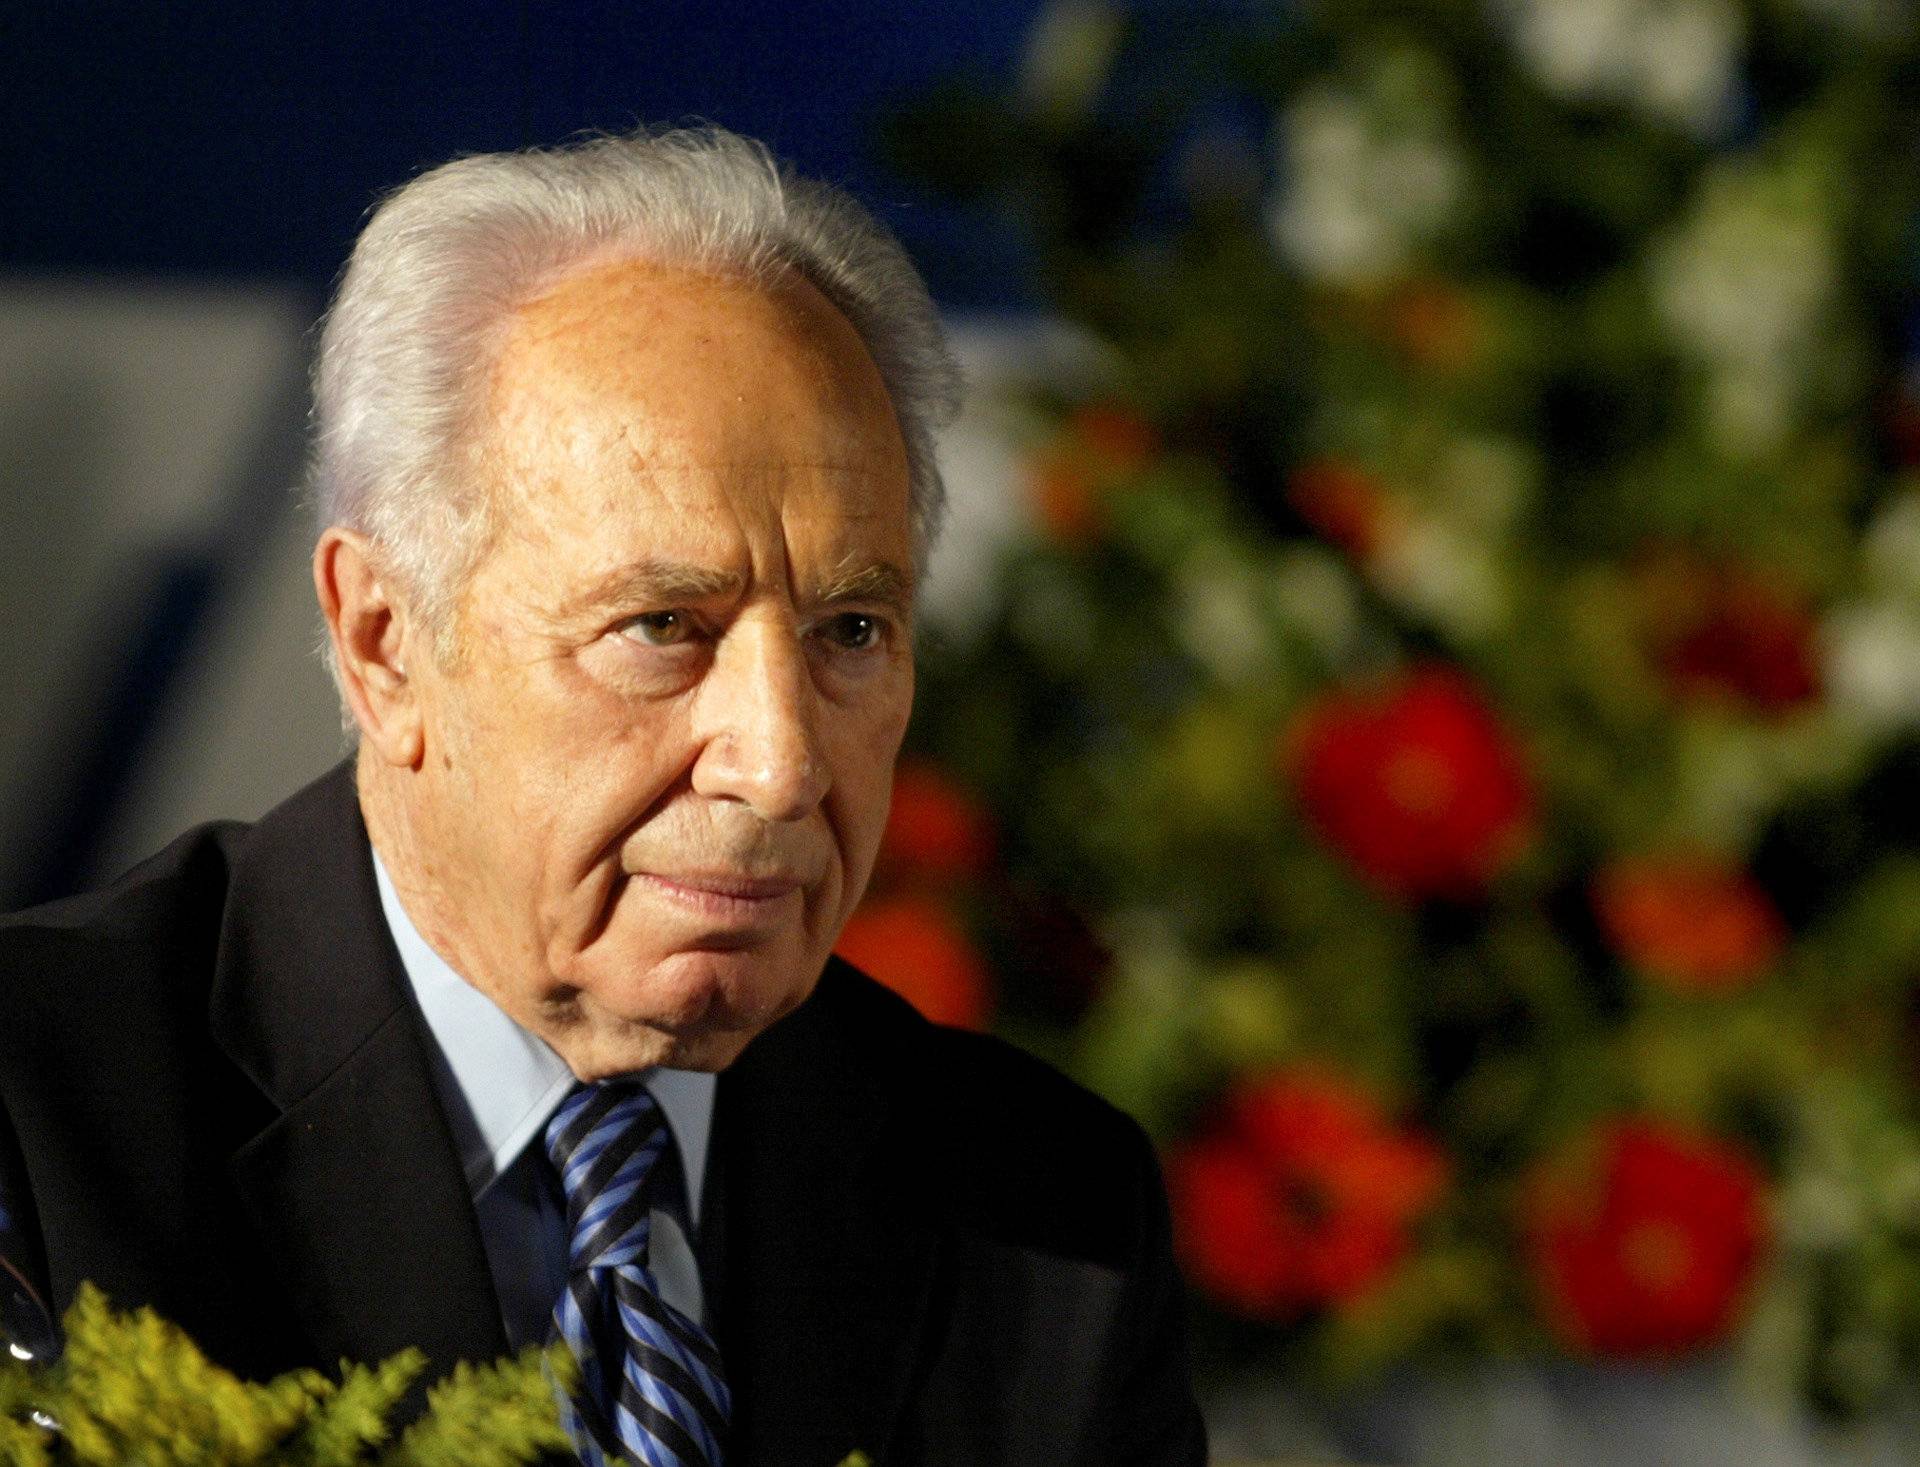 File photo of Labour Party leader Shimon Peres attending his party's conference in Tel Aviv.